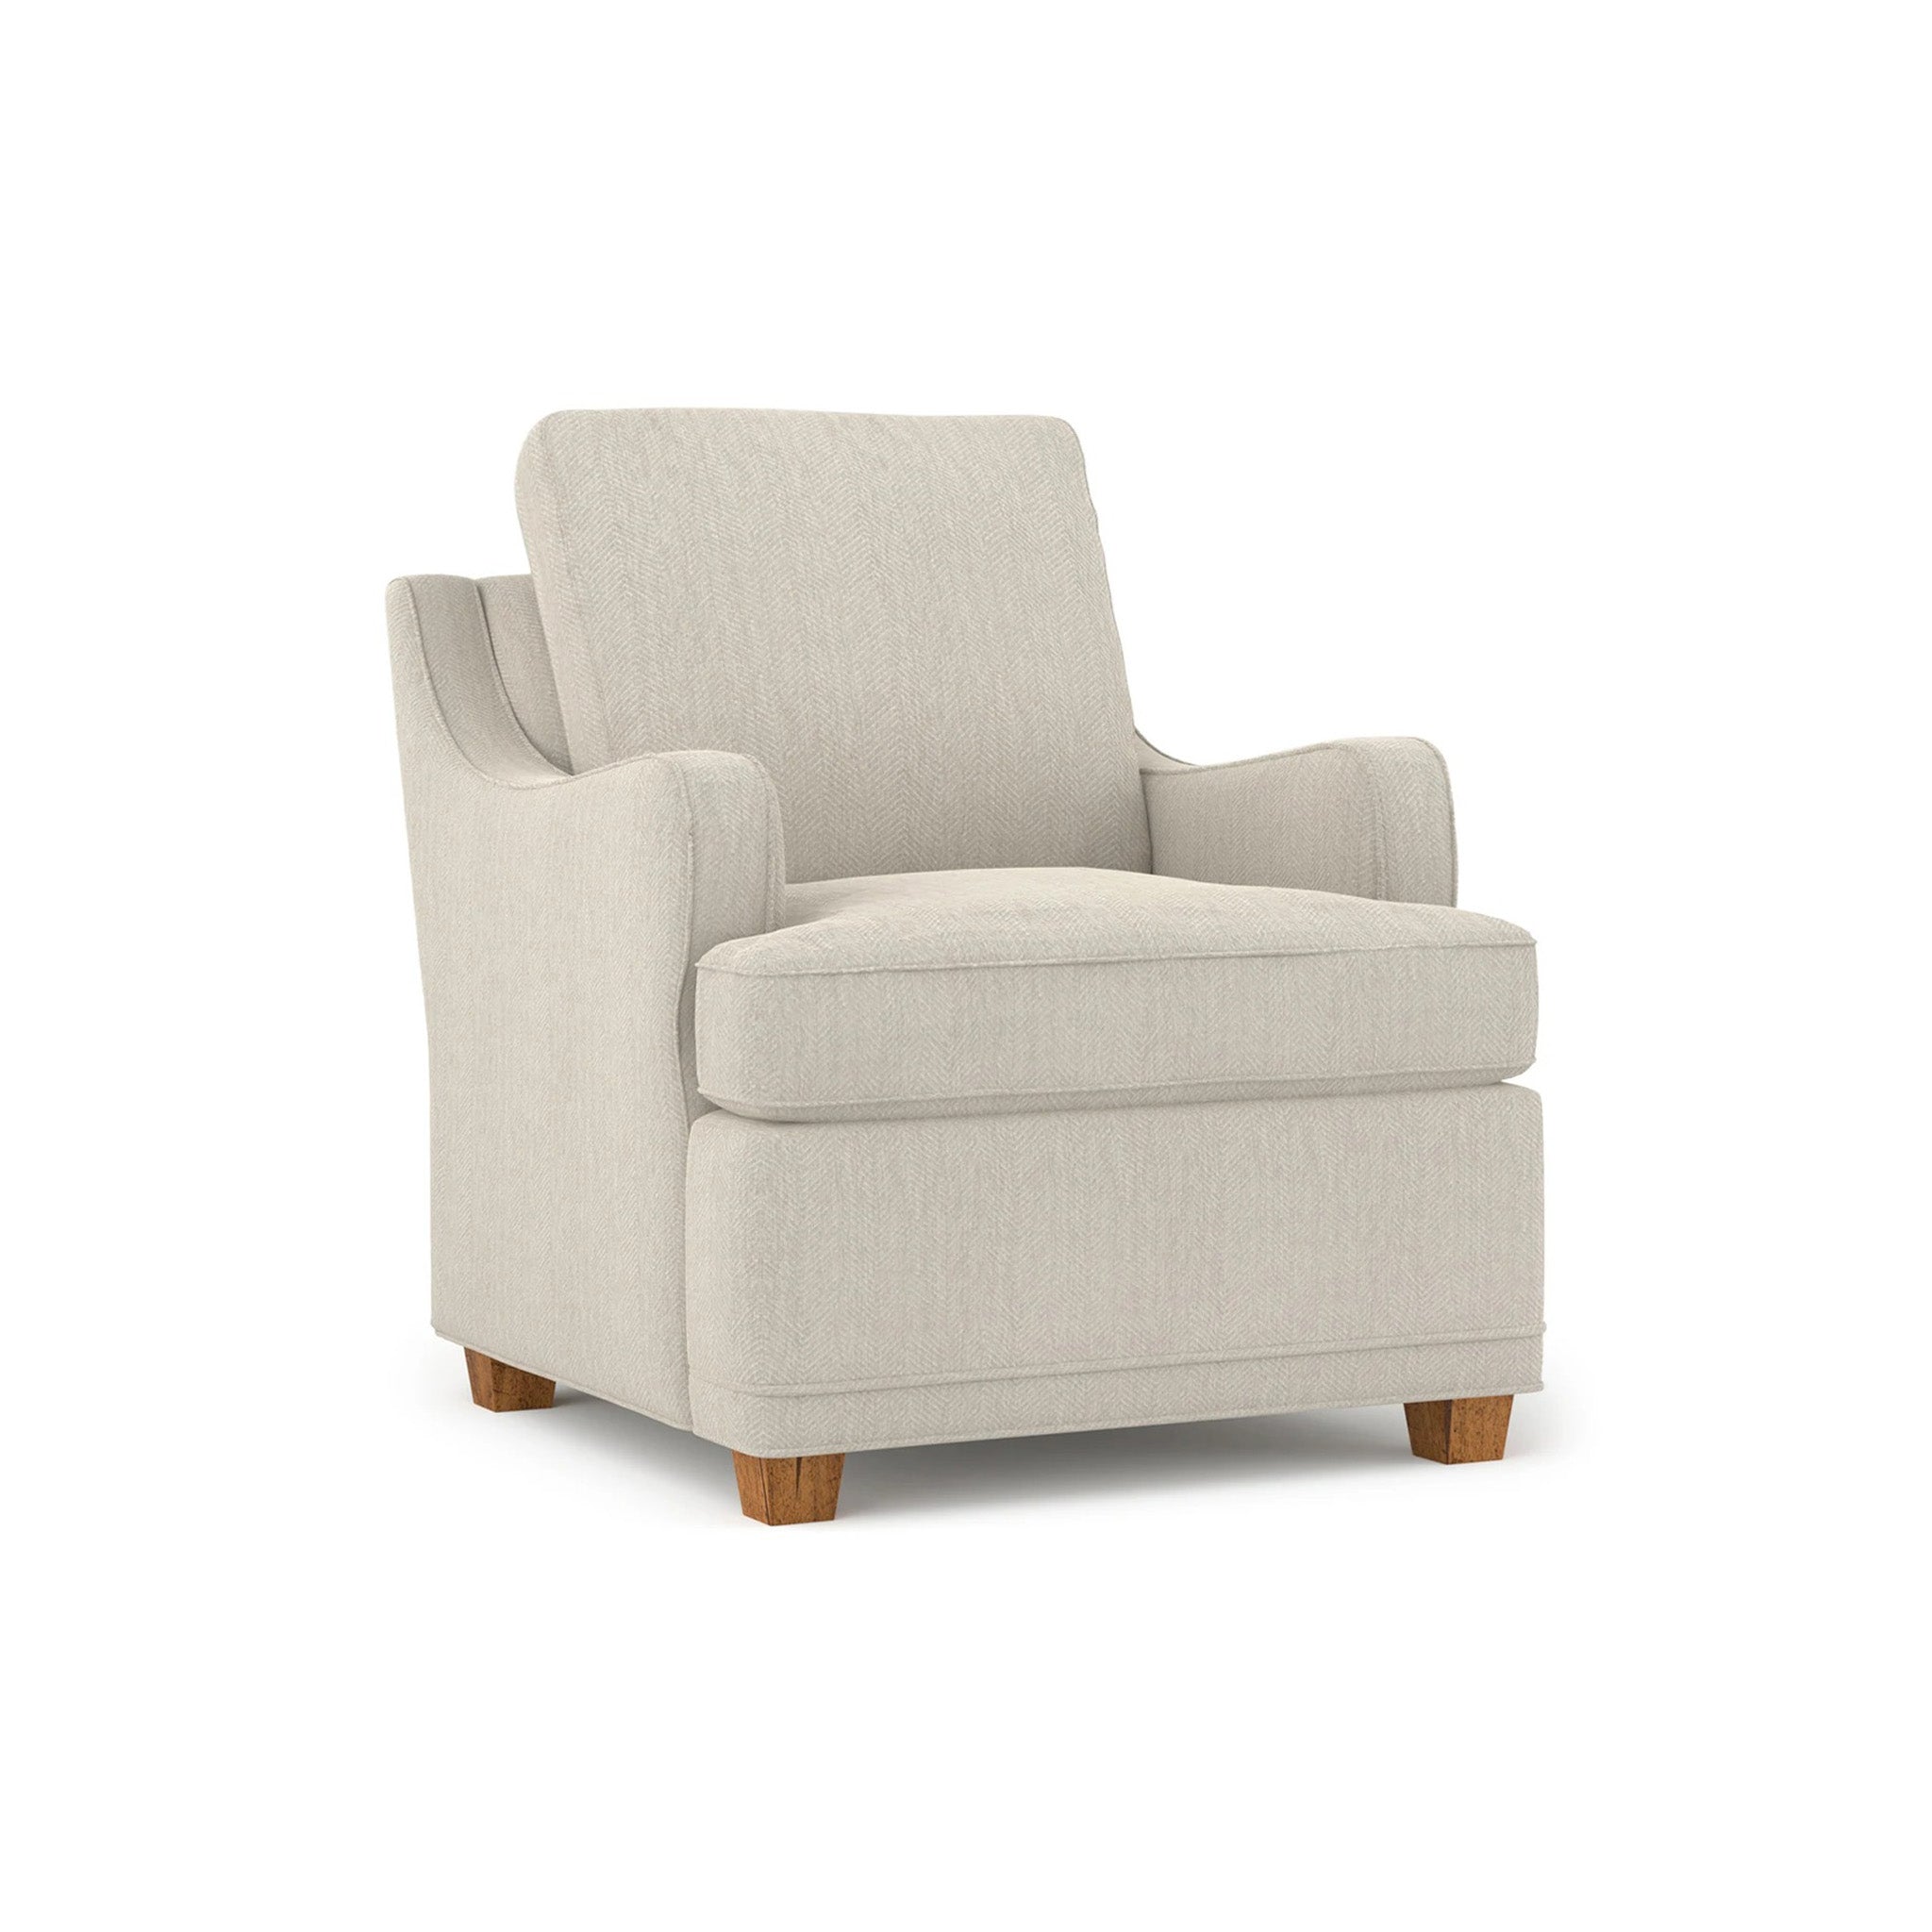 The Lyme Estate Collection - Arm Chair